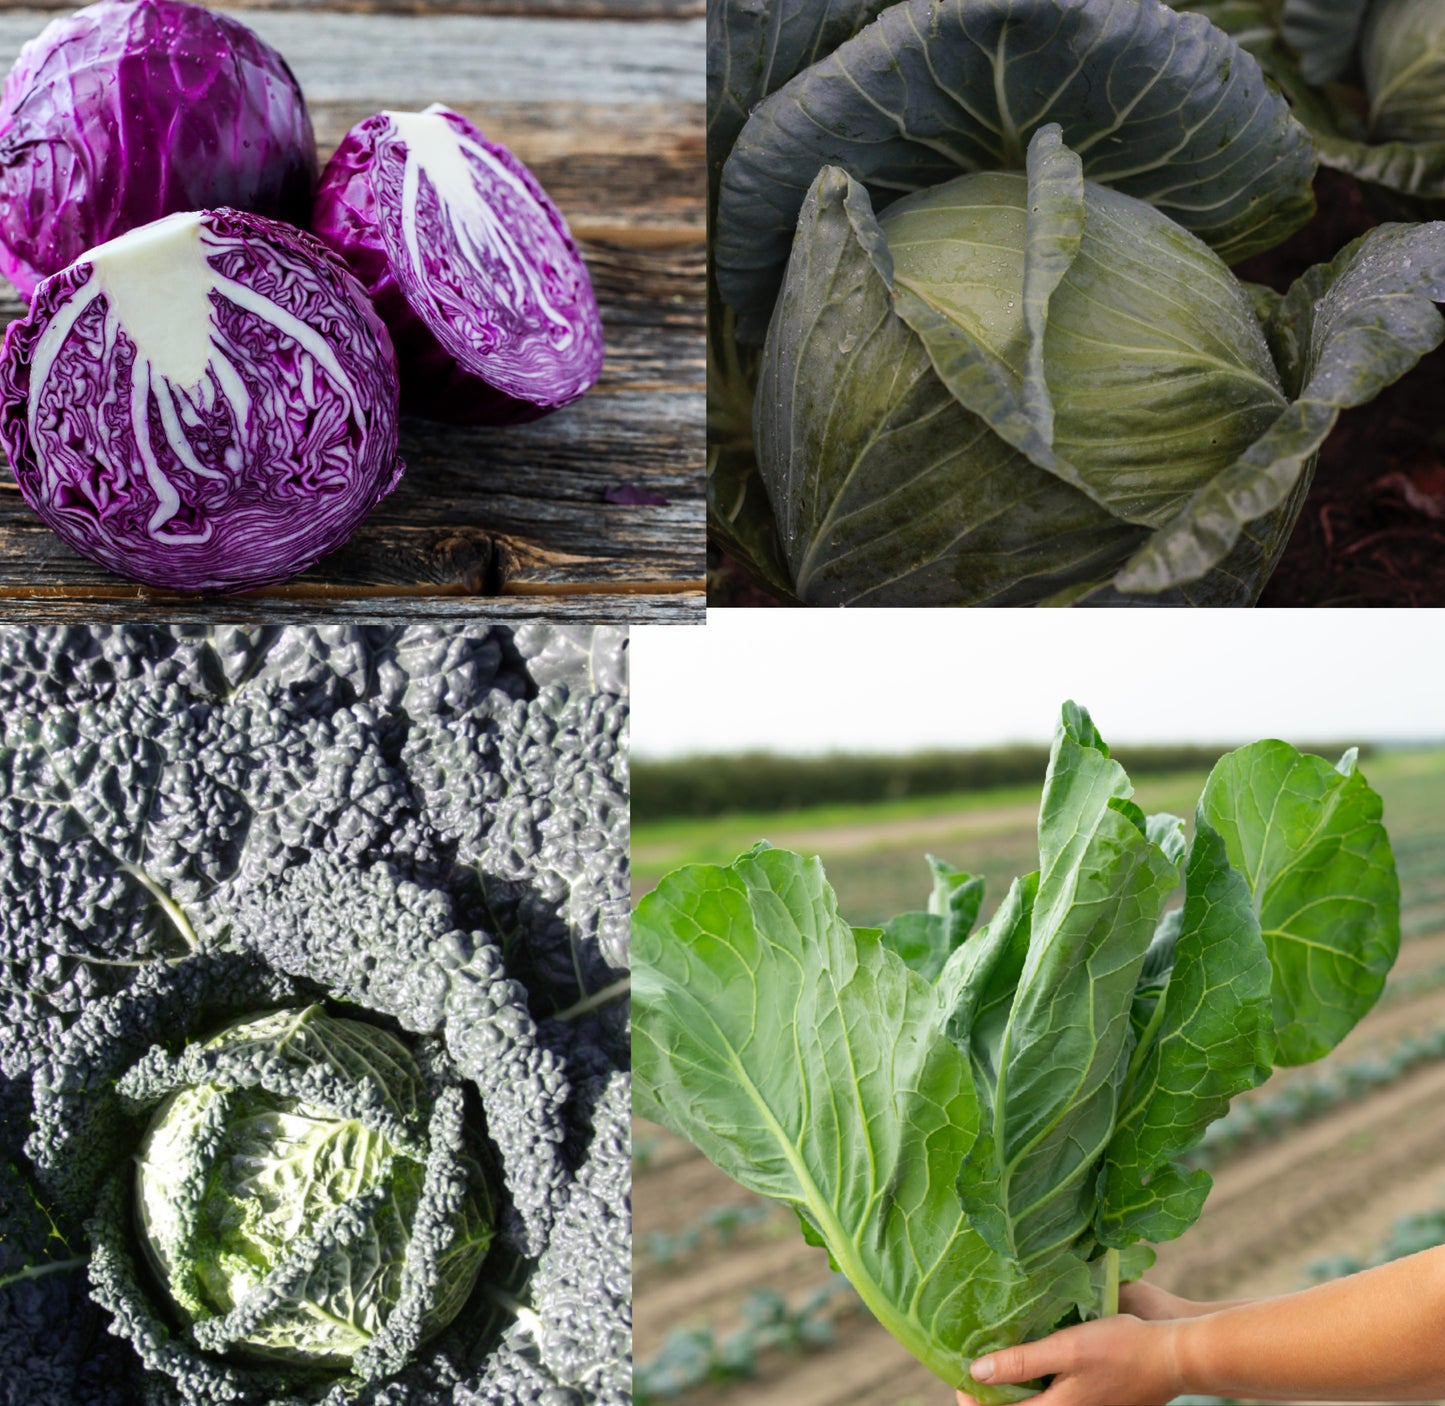 Cabbage Plug Plants MIXED PACK "Grow Your Own" Vegetables 'Ready to Plant Now' Young Vegetable Plants **Letterbox Friendly**